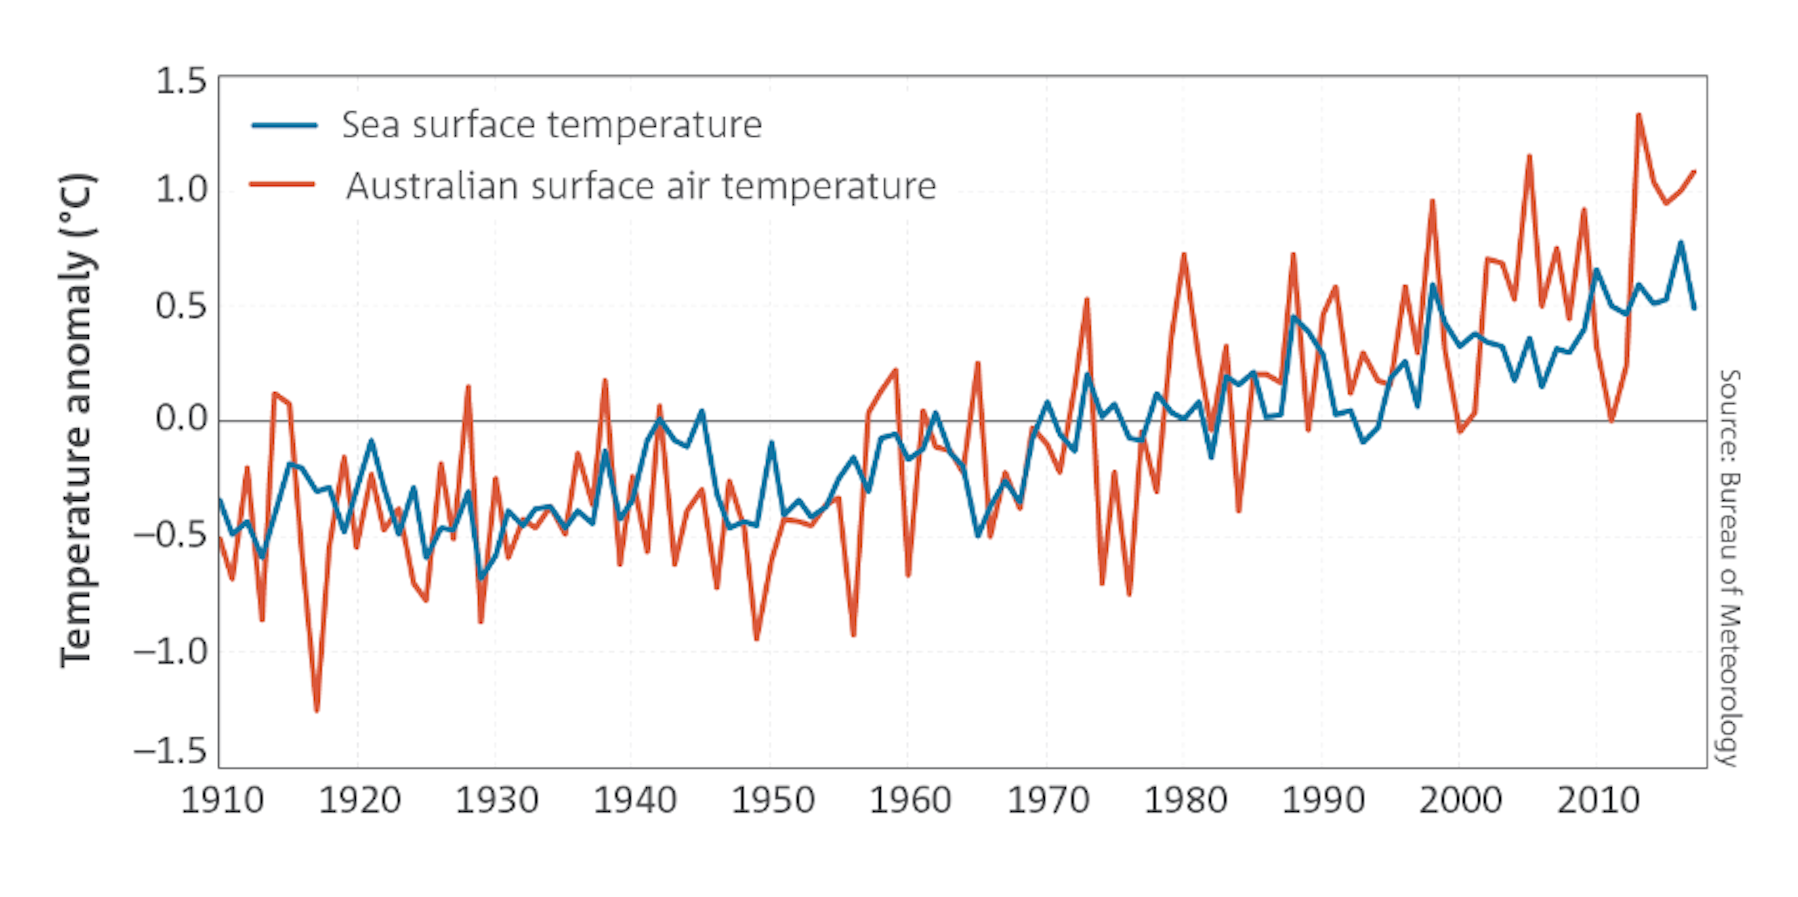 State Of The Climate 2018 Social Media Blog Bureau Of Meteorology